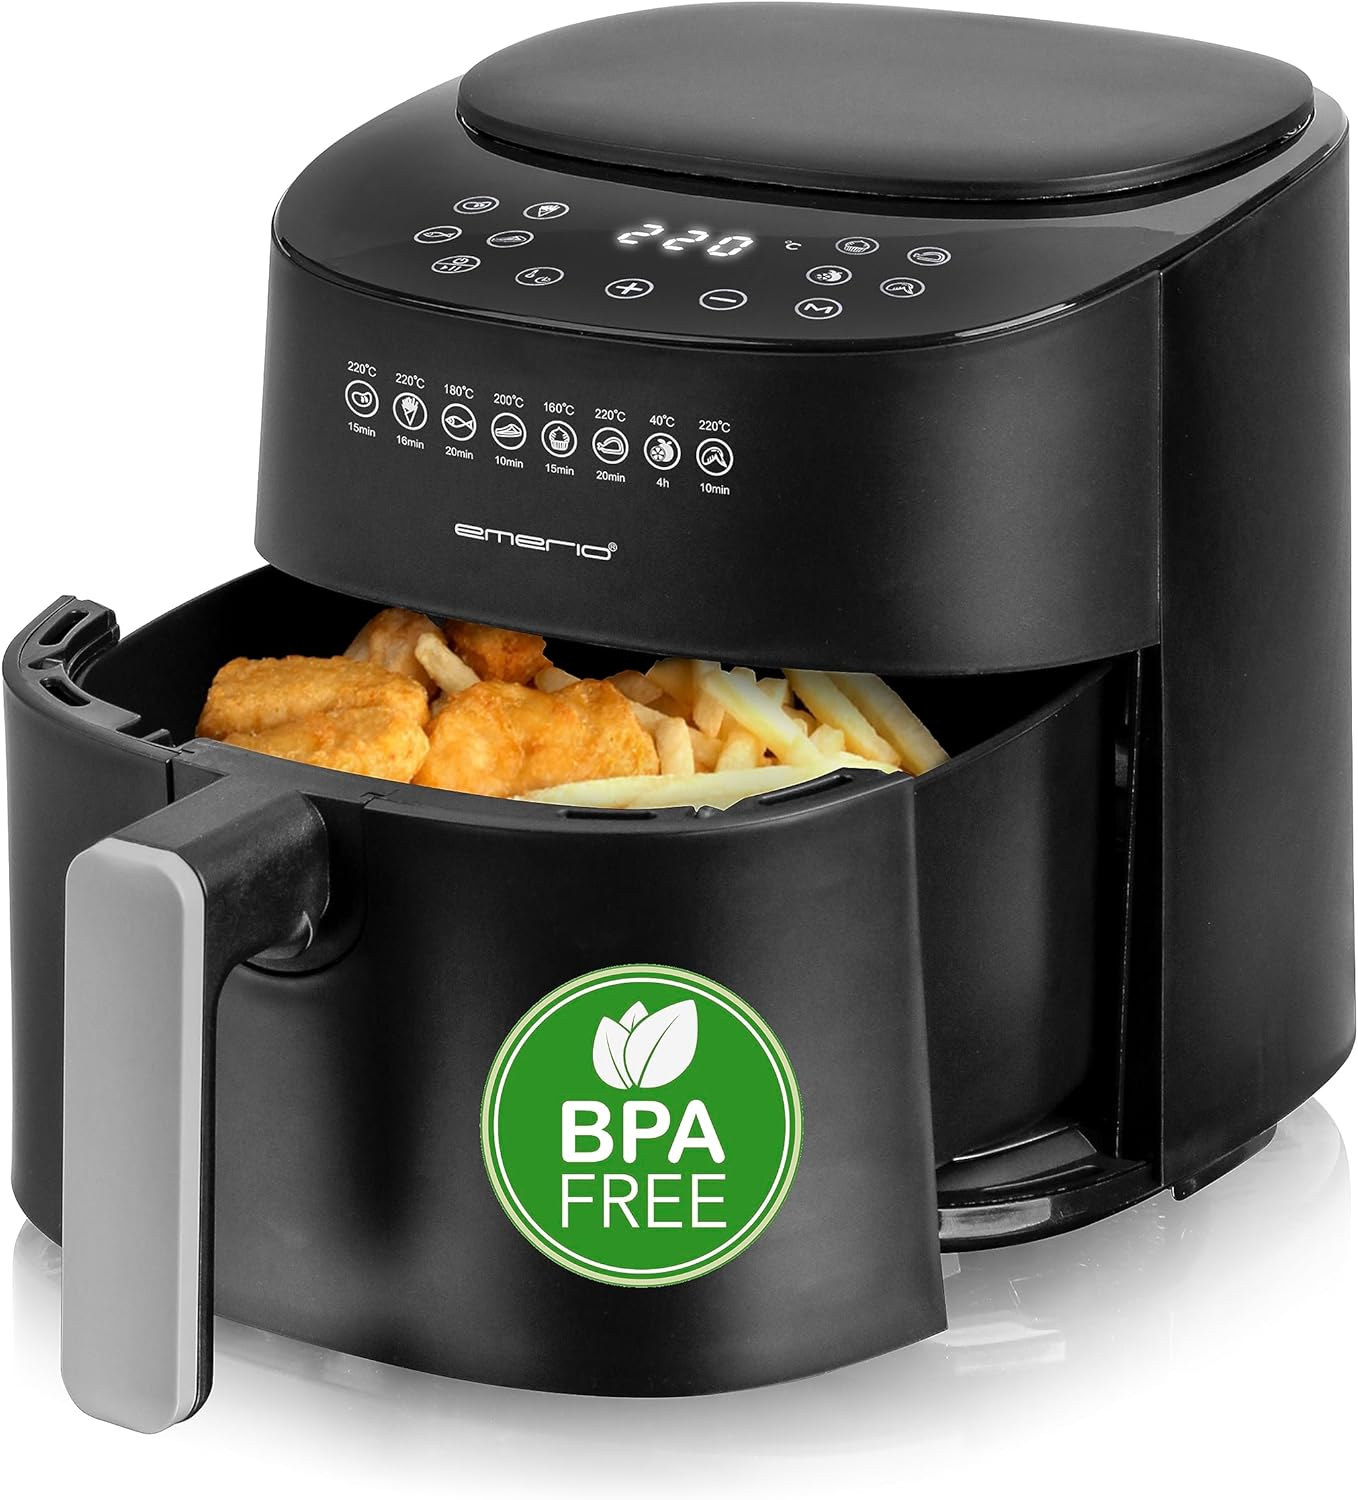 Emerio Large Digital Hot Air Fryer, Top AirFryer, Frying without Additional Oil, 4.5 Litre Volume, 8 Automatic Programmes, Cool Touch, BPA-Free, Fast Heating, 1300 Watt, AF-129369